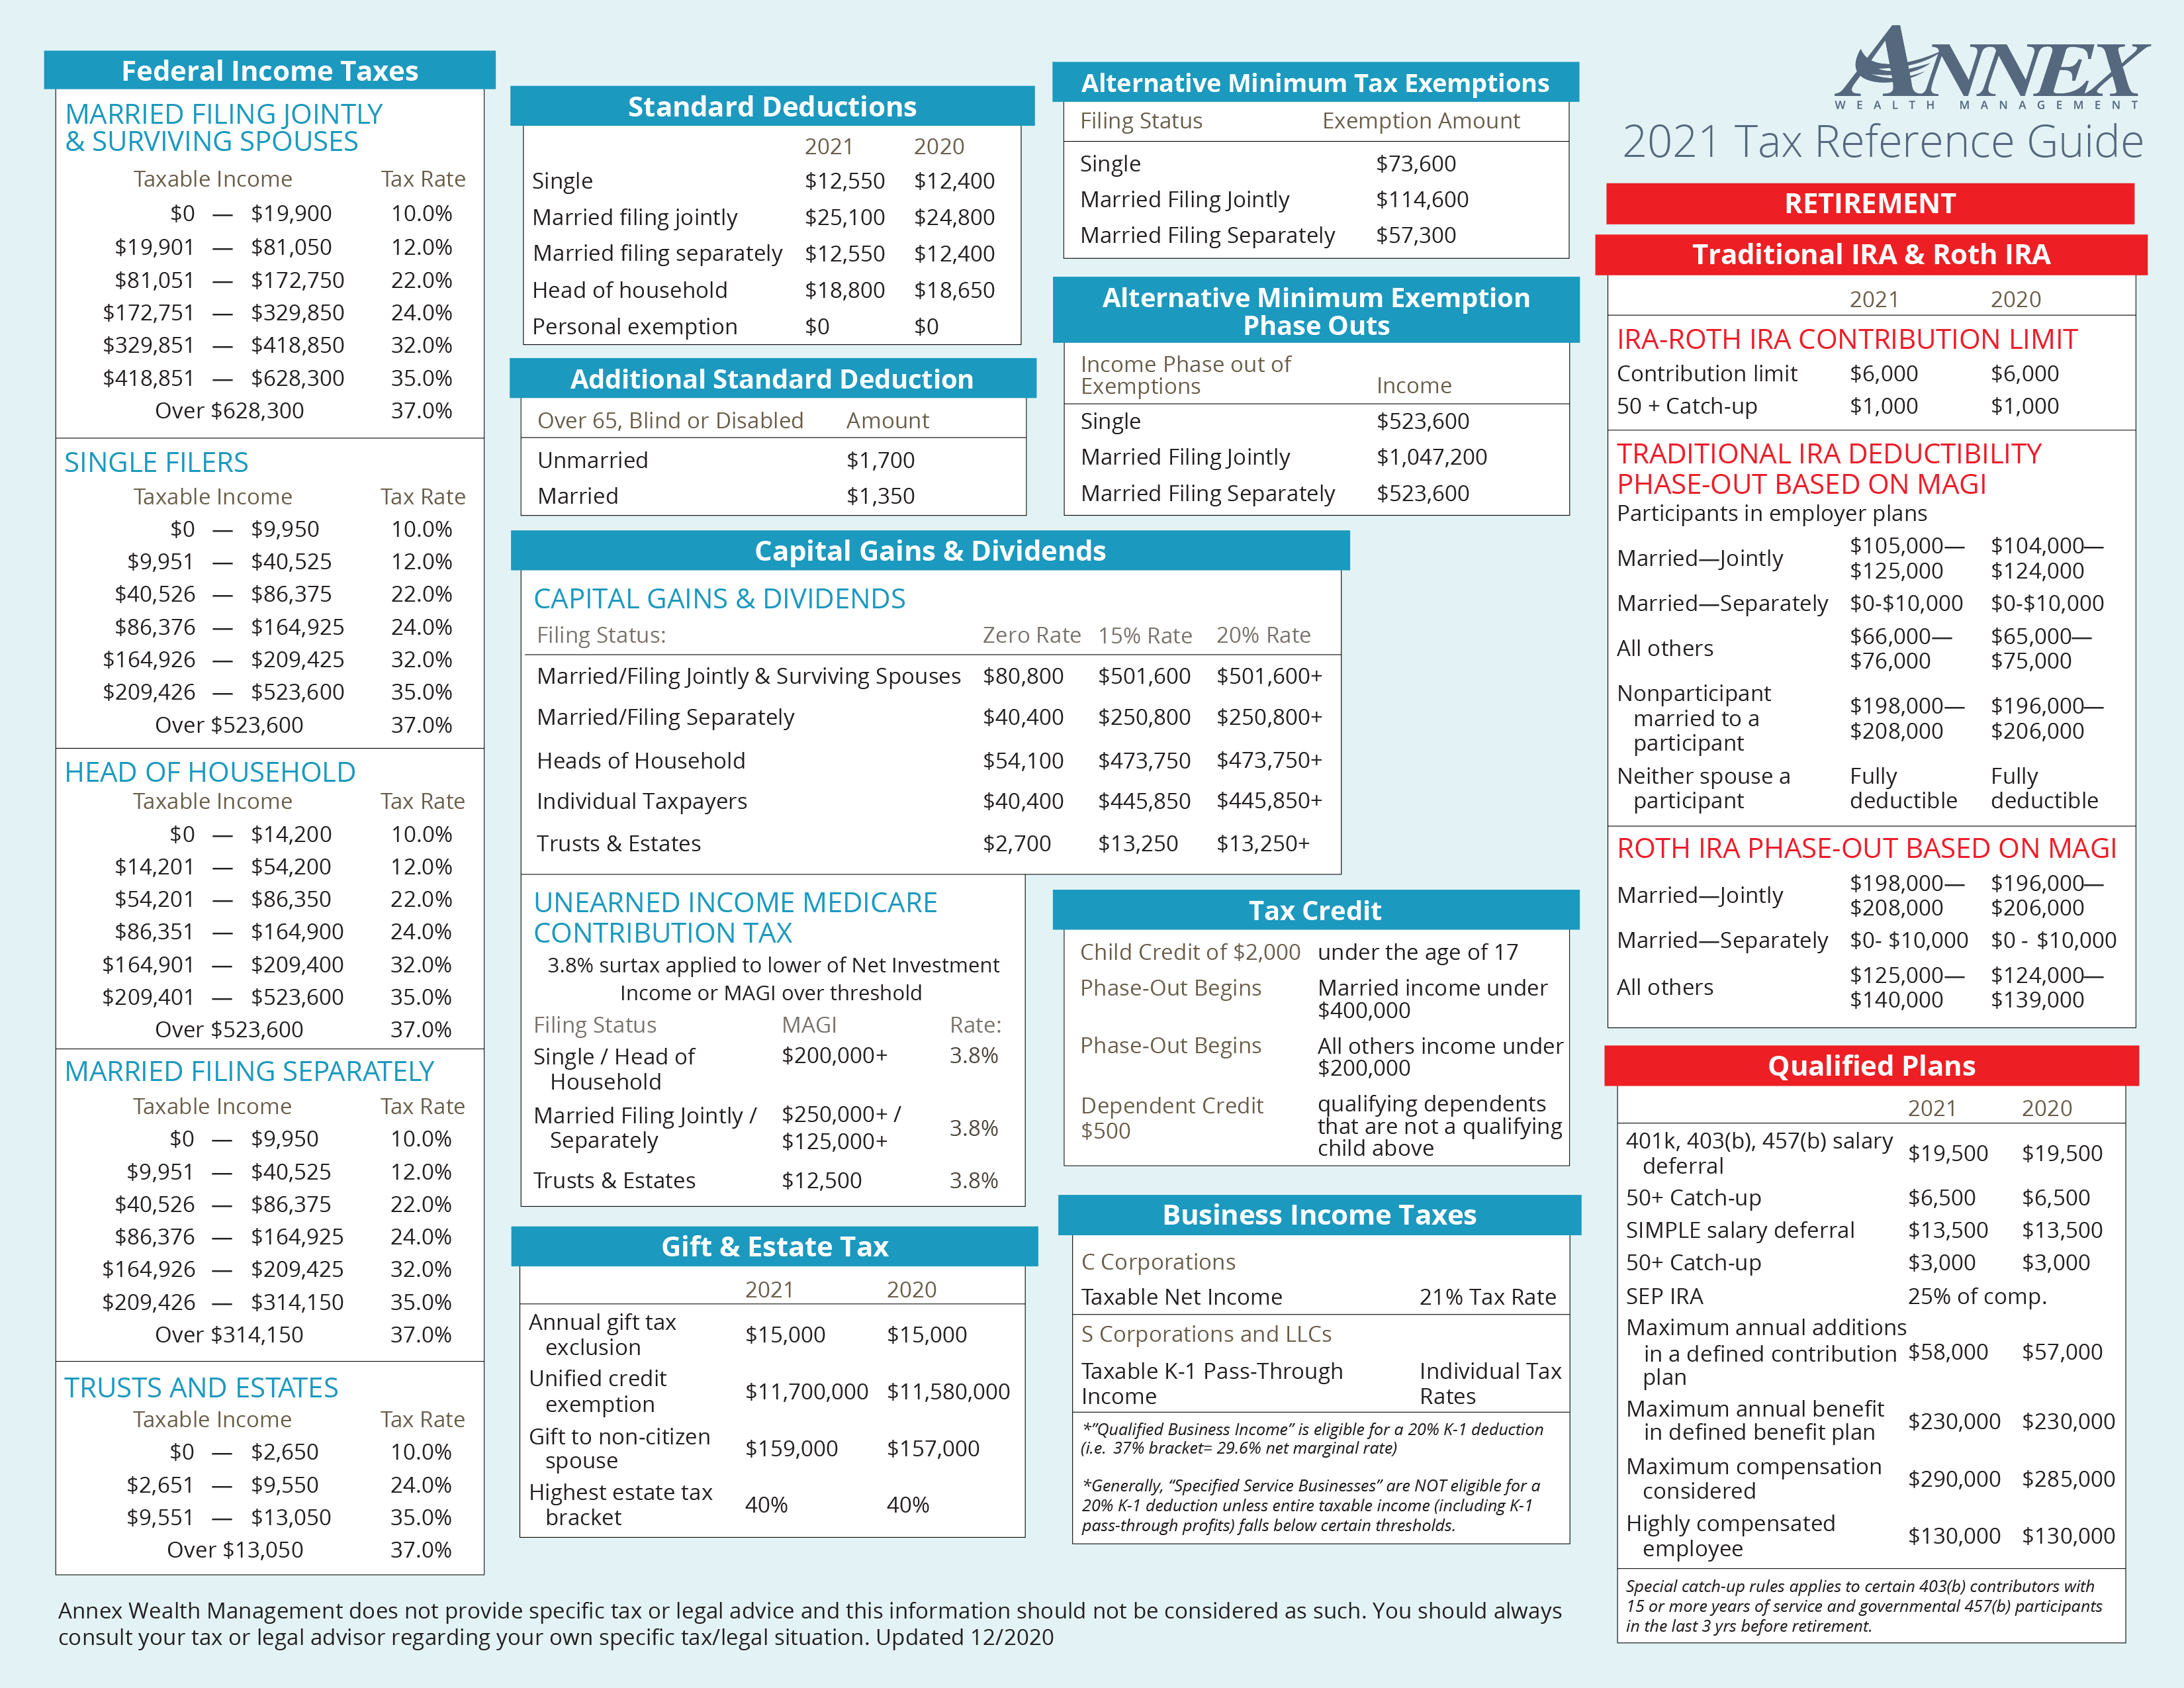 Tax Reference Guide Annex Wealth Management